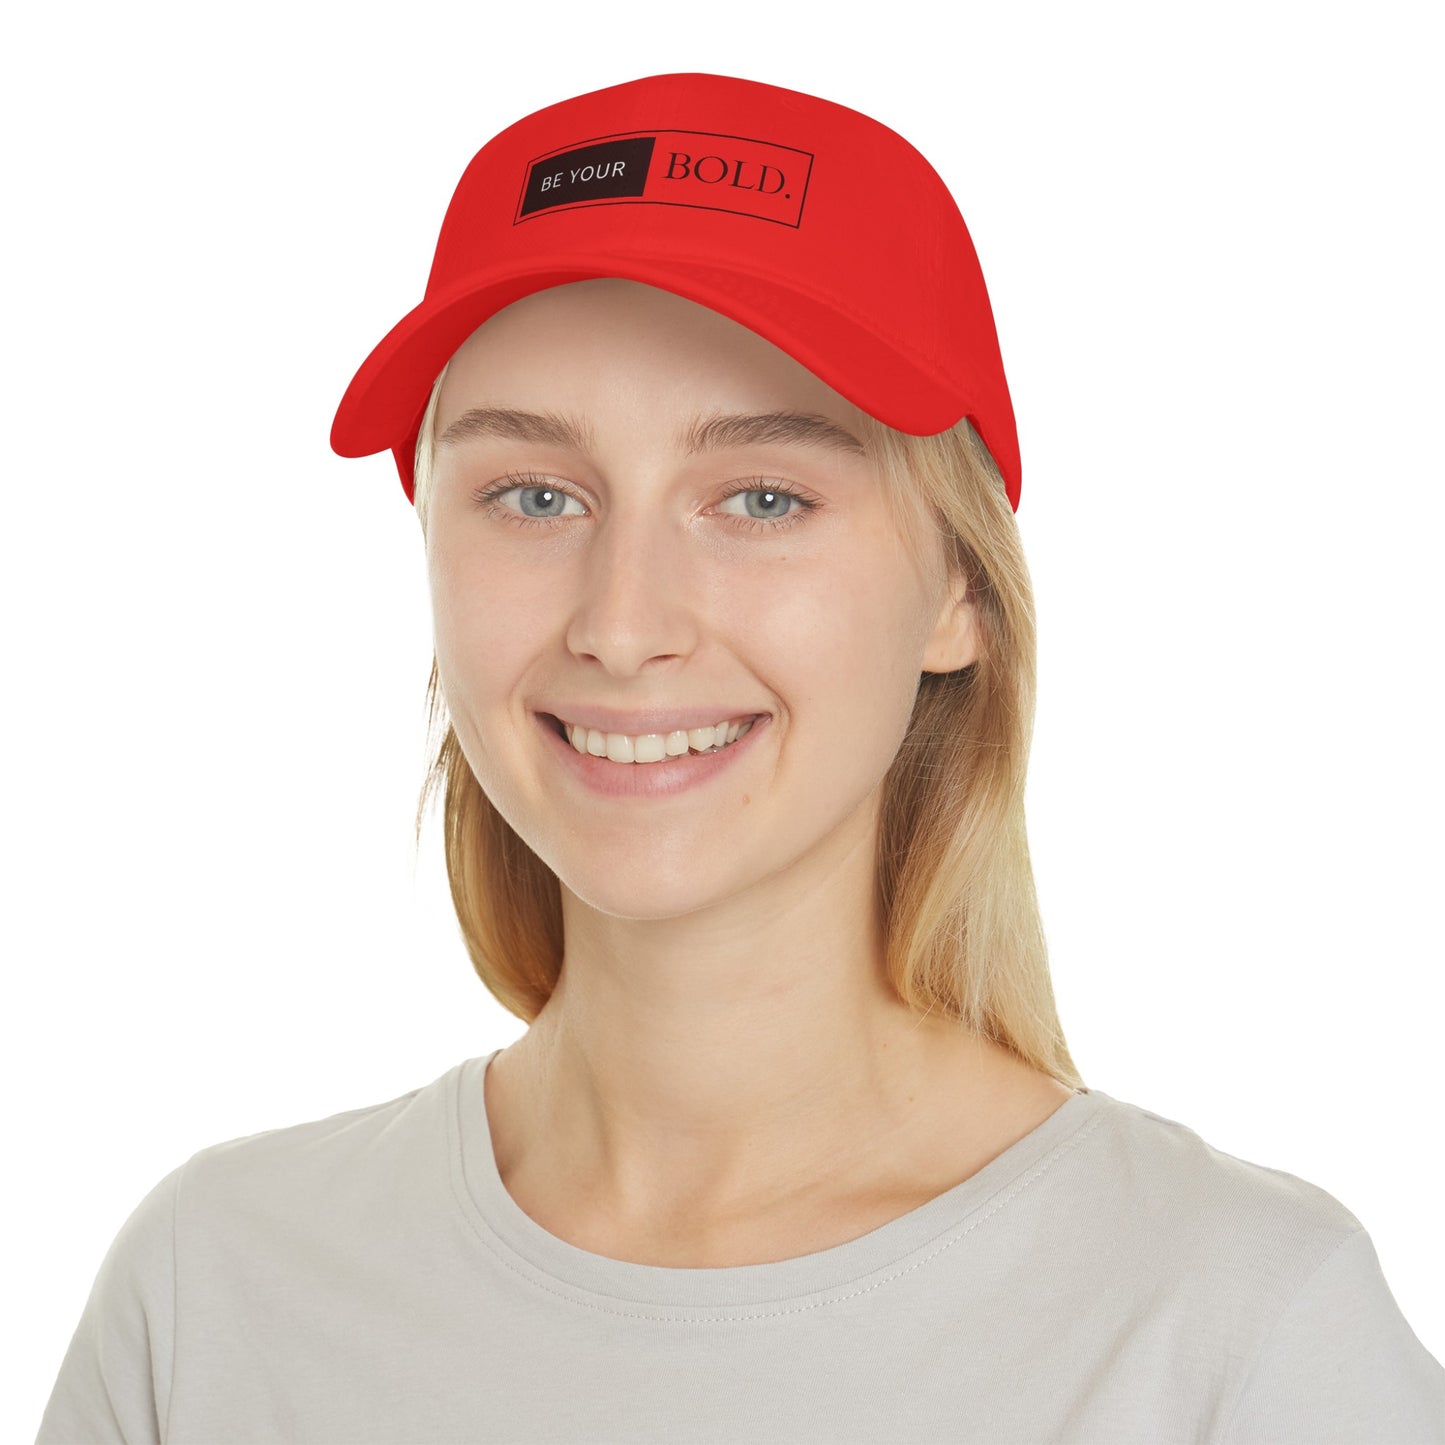 Be your Bold (1) Low Profile Baseball Cap